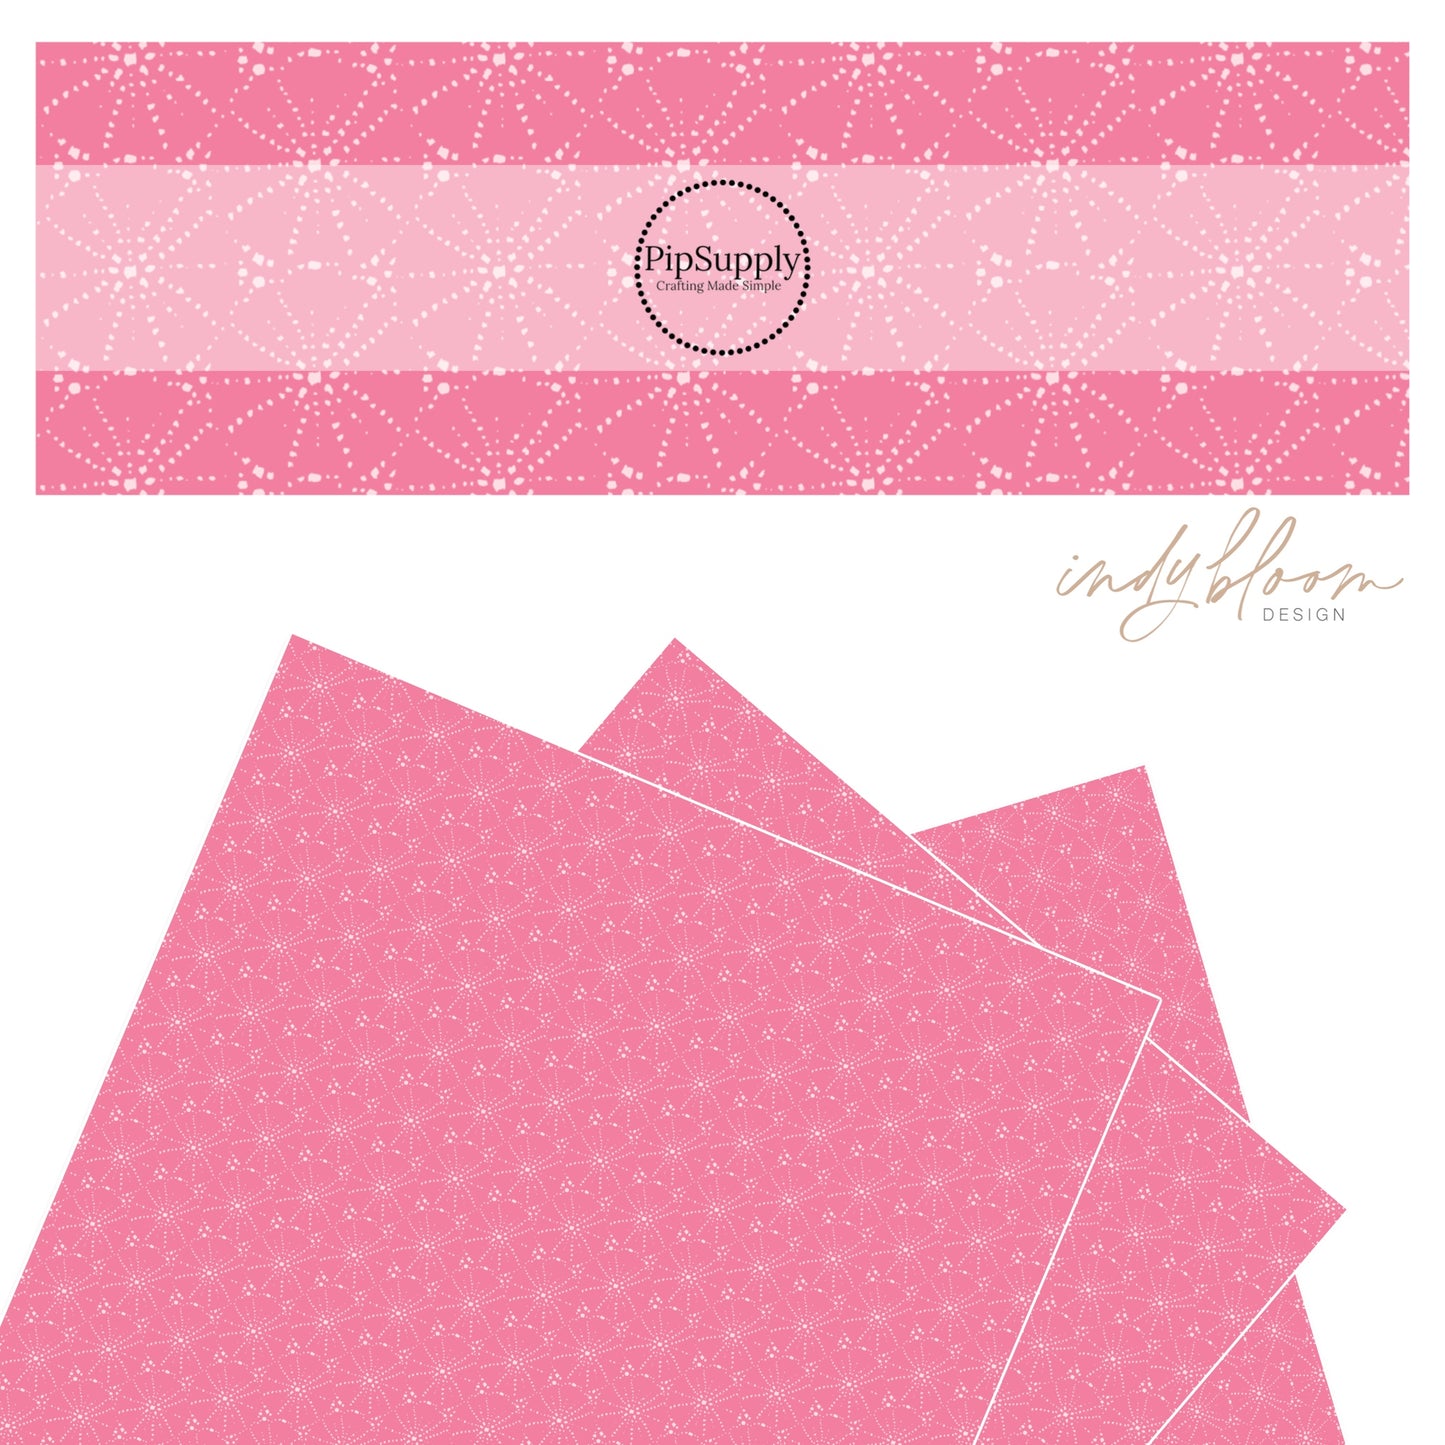 Bubble pink pattern with white sand dollar faux leather sheet.